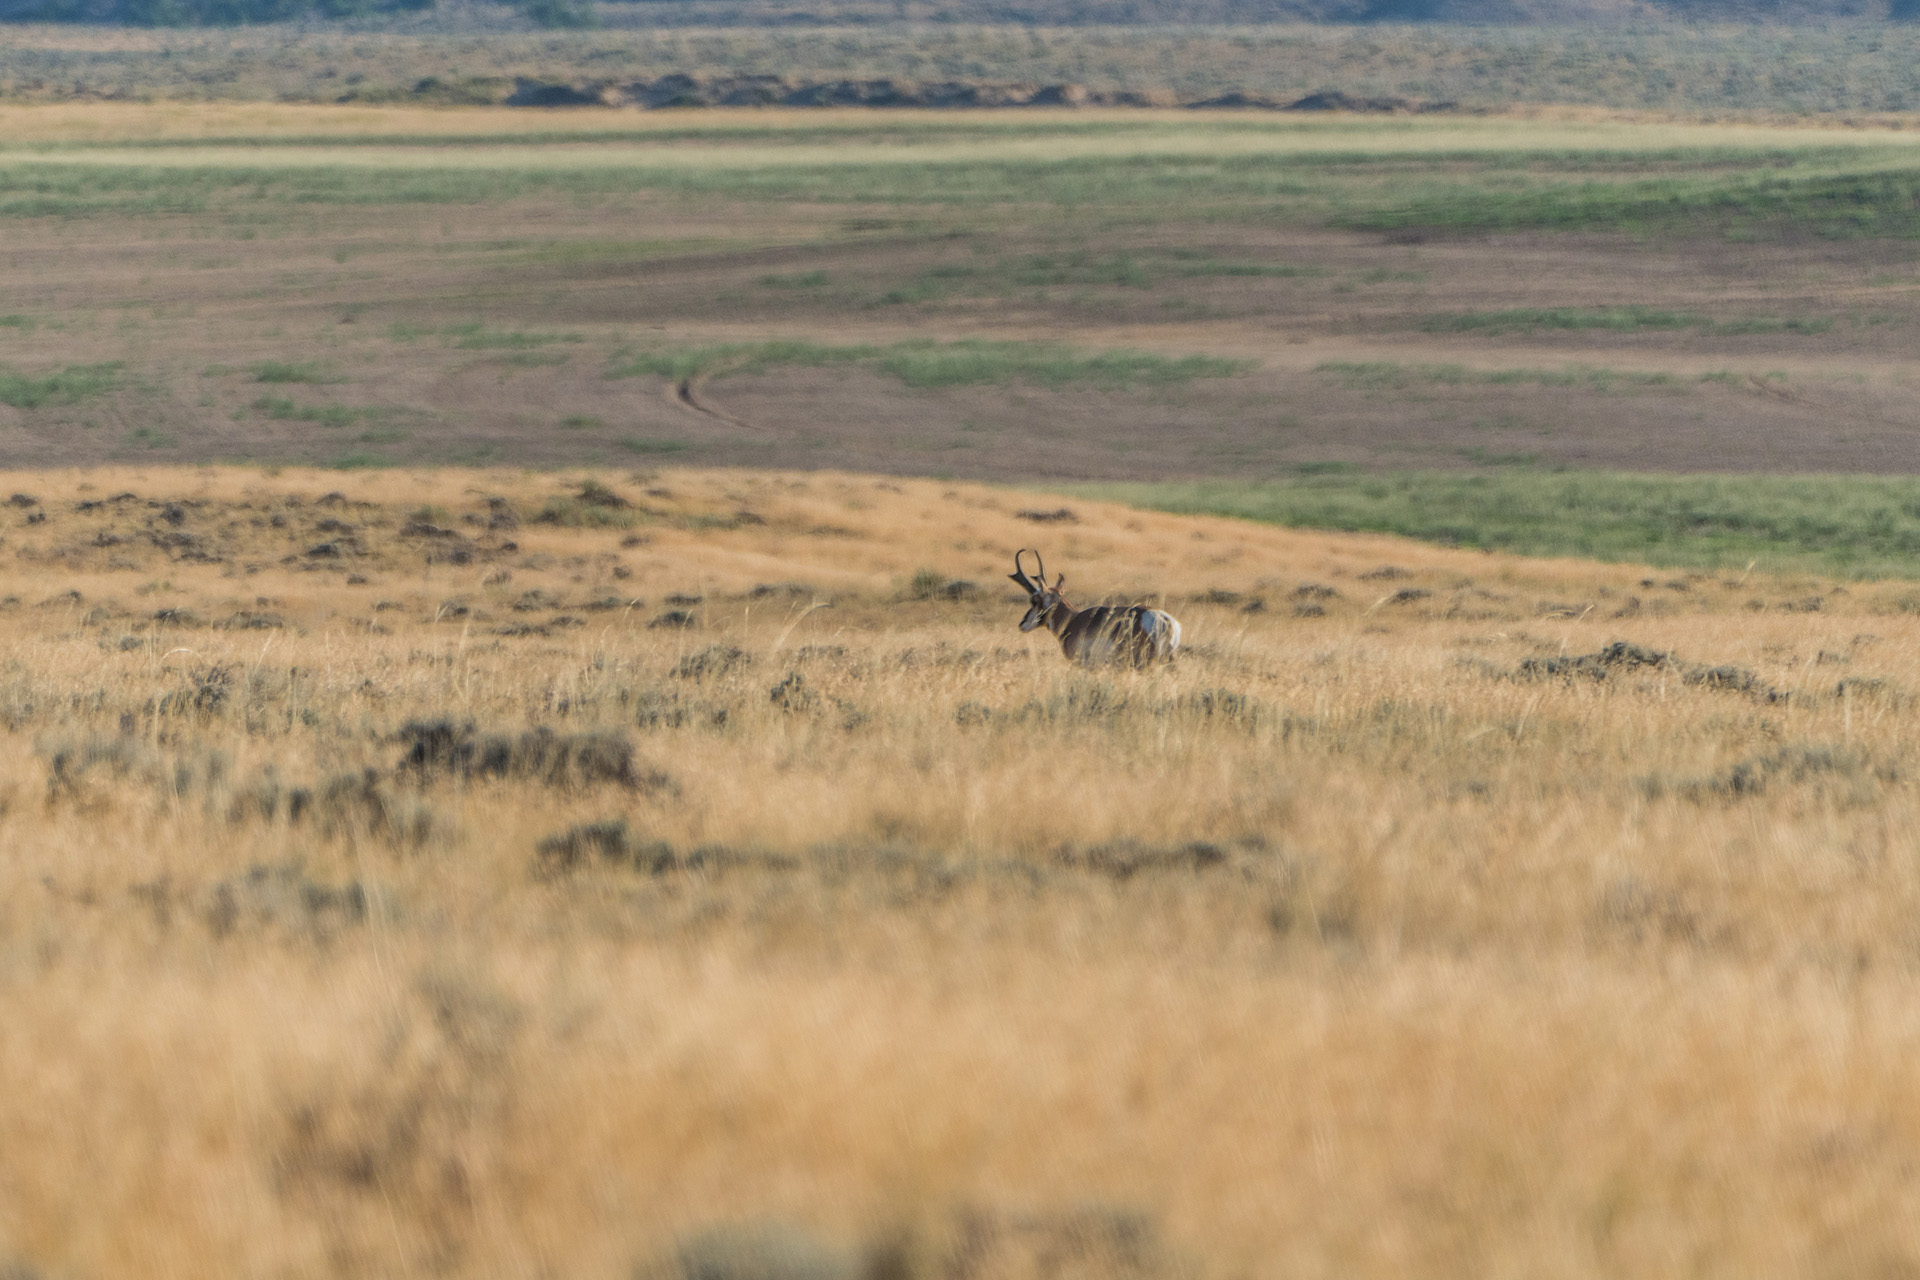 The 5 best states for antelope hunting include Wyoming, Montana, Arizona, New Mexico, and Colorado.